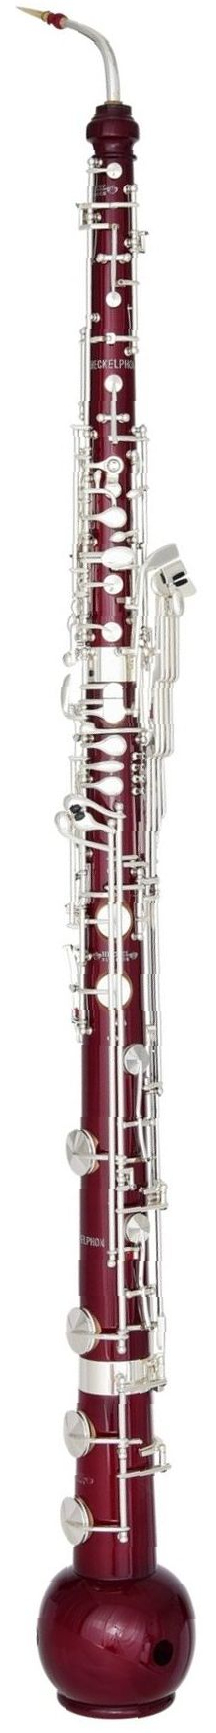 Picture of a Heckelphone.